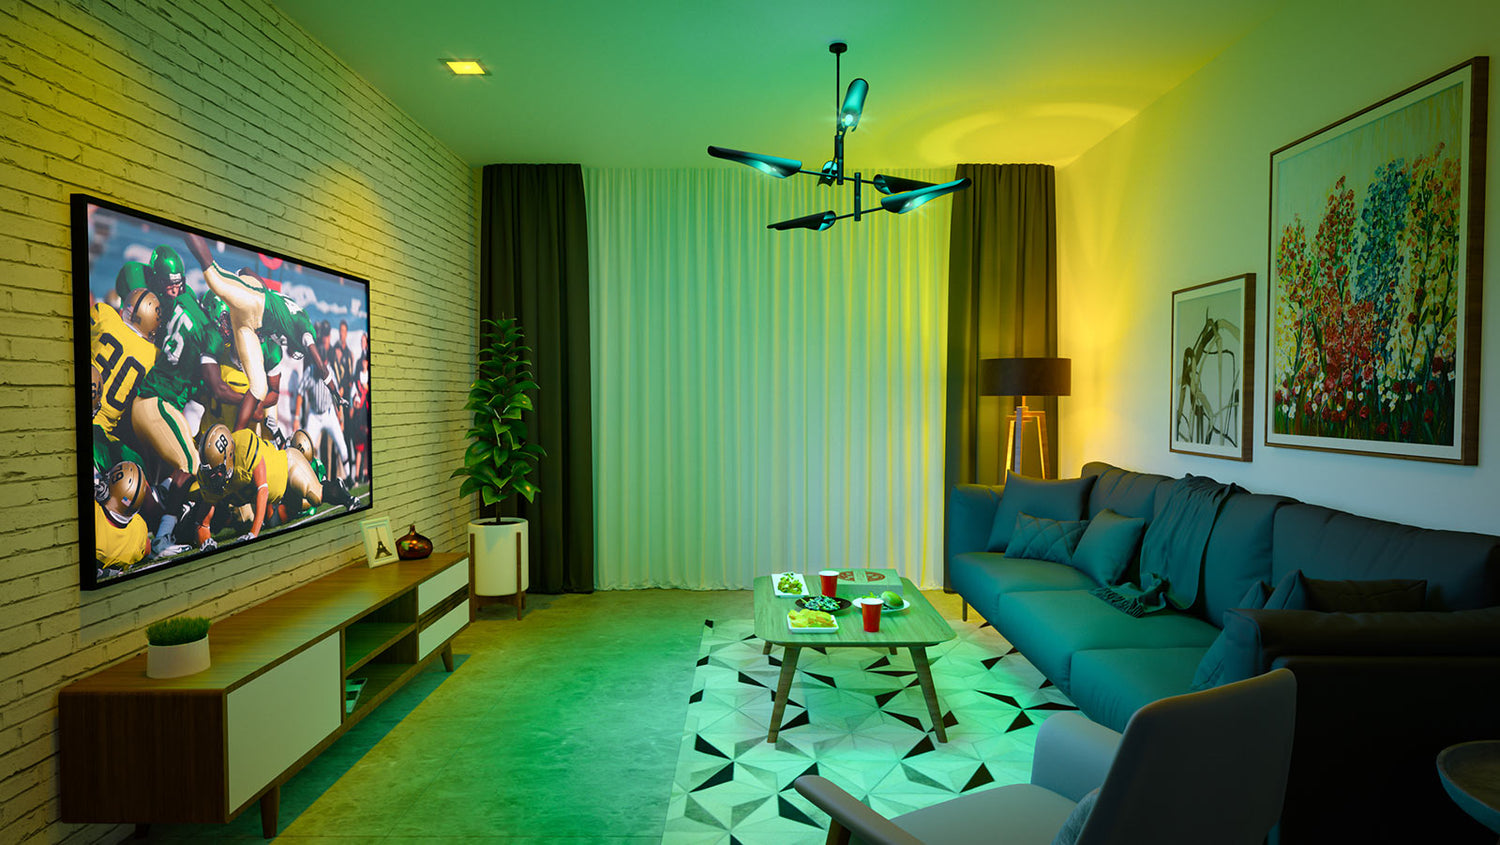 Wyze color bulb lighting living room in green and yellow lighting